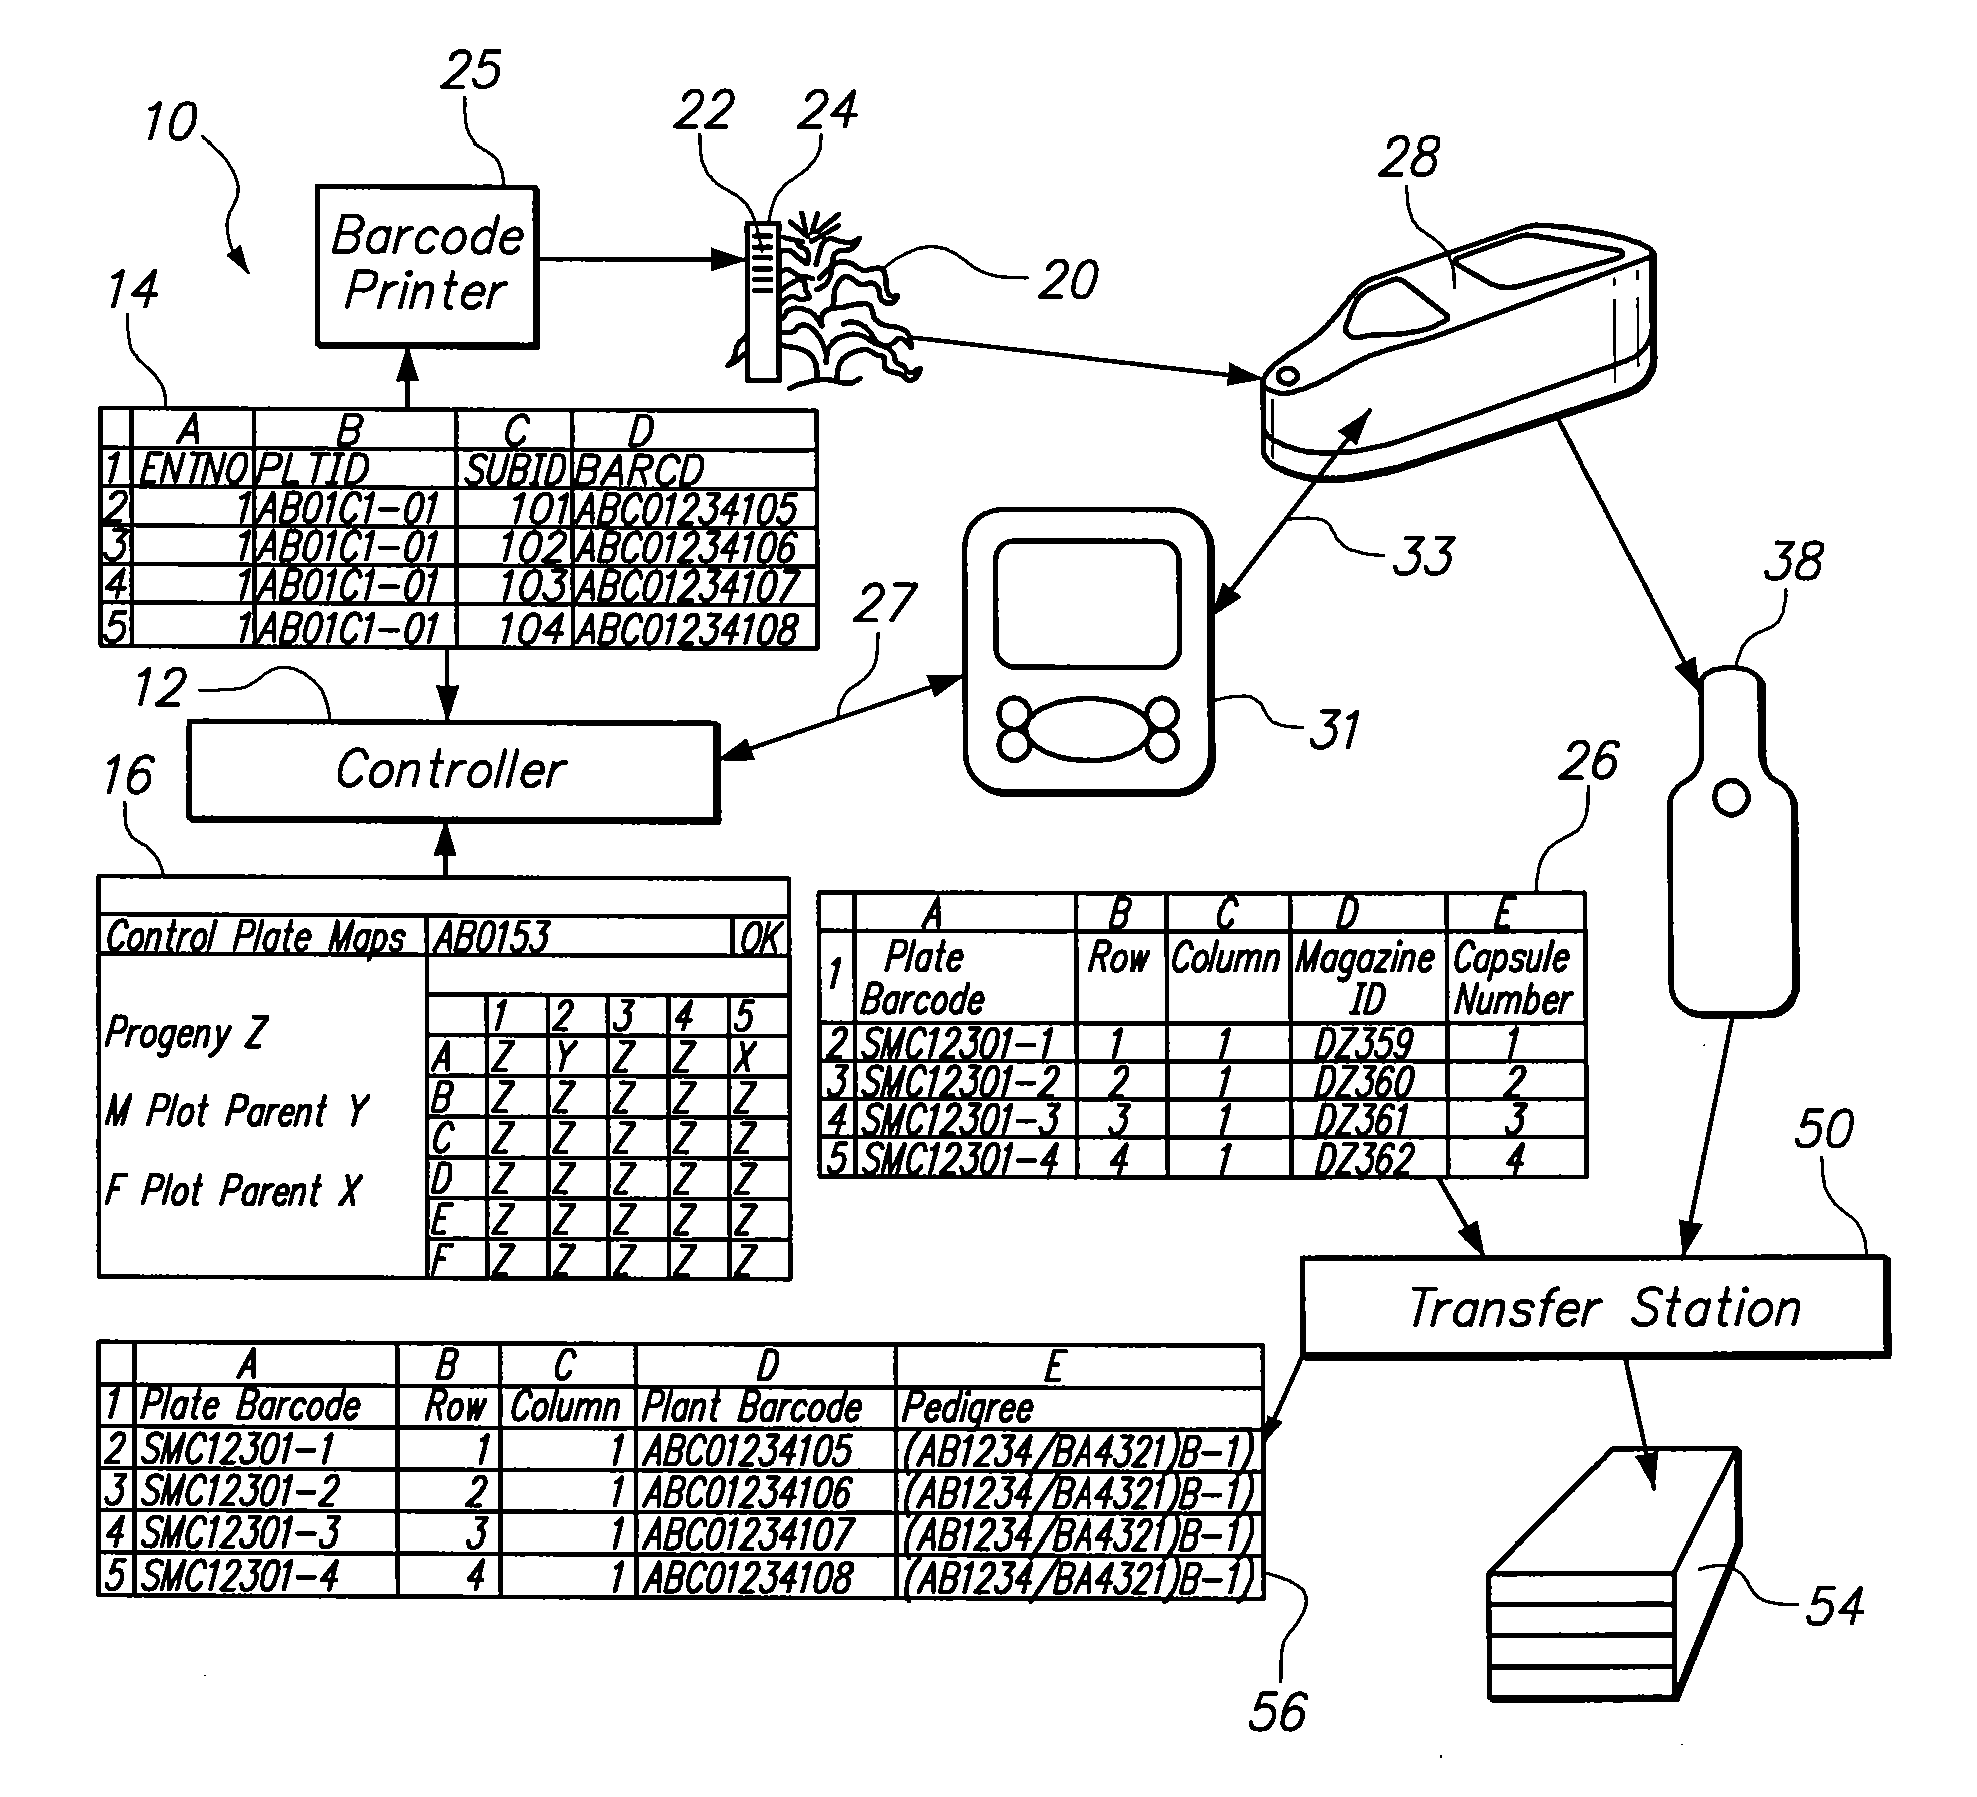 System for sampling and tracking plant material